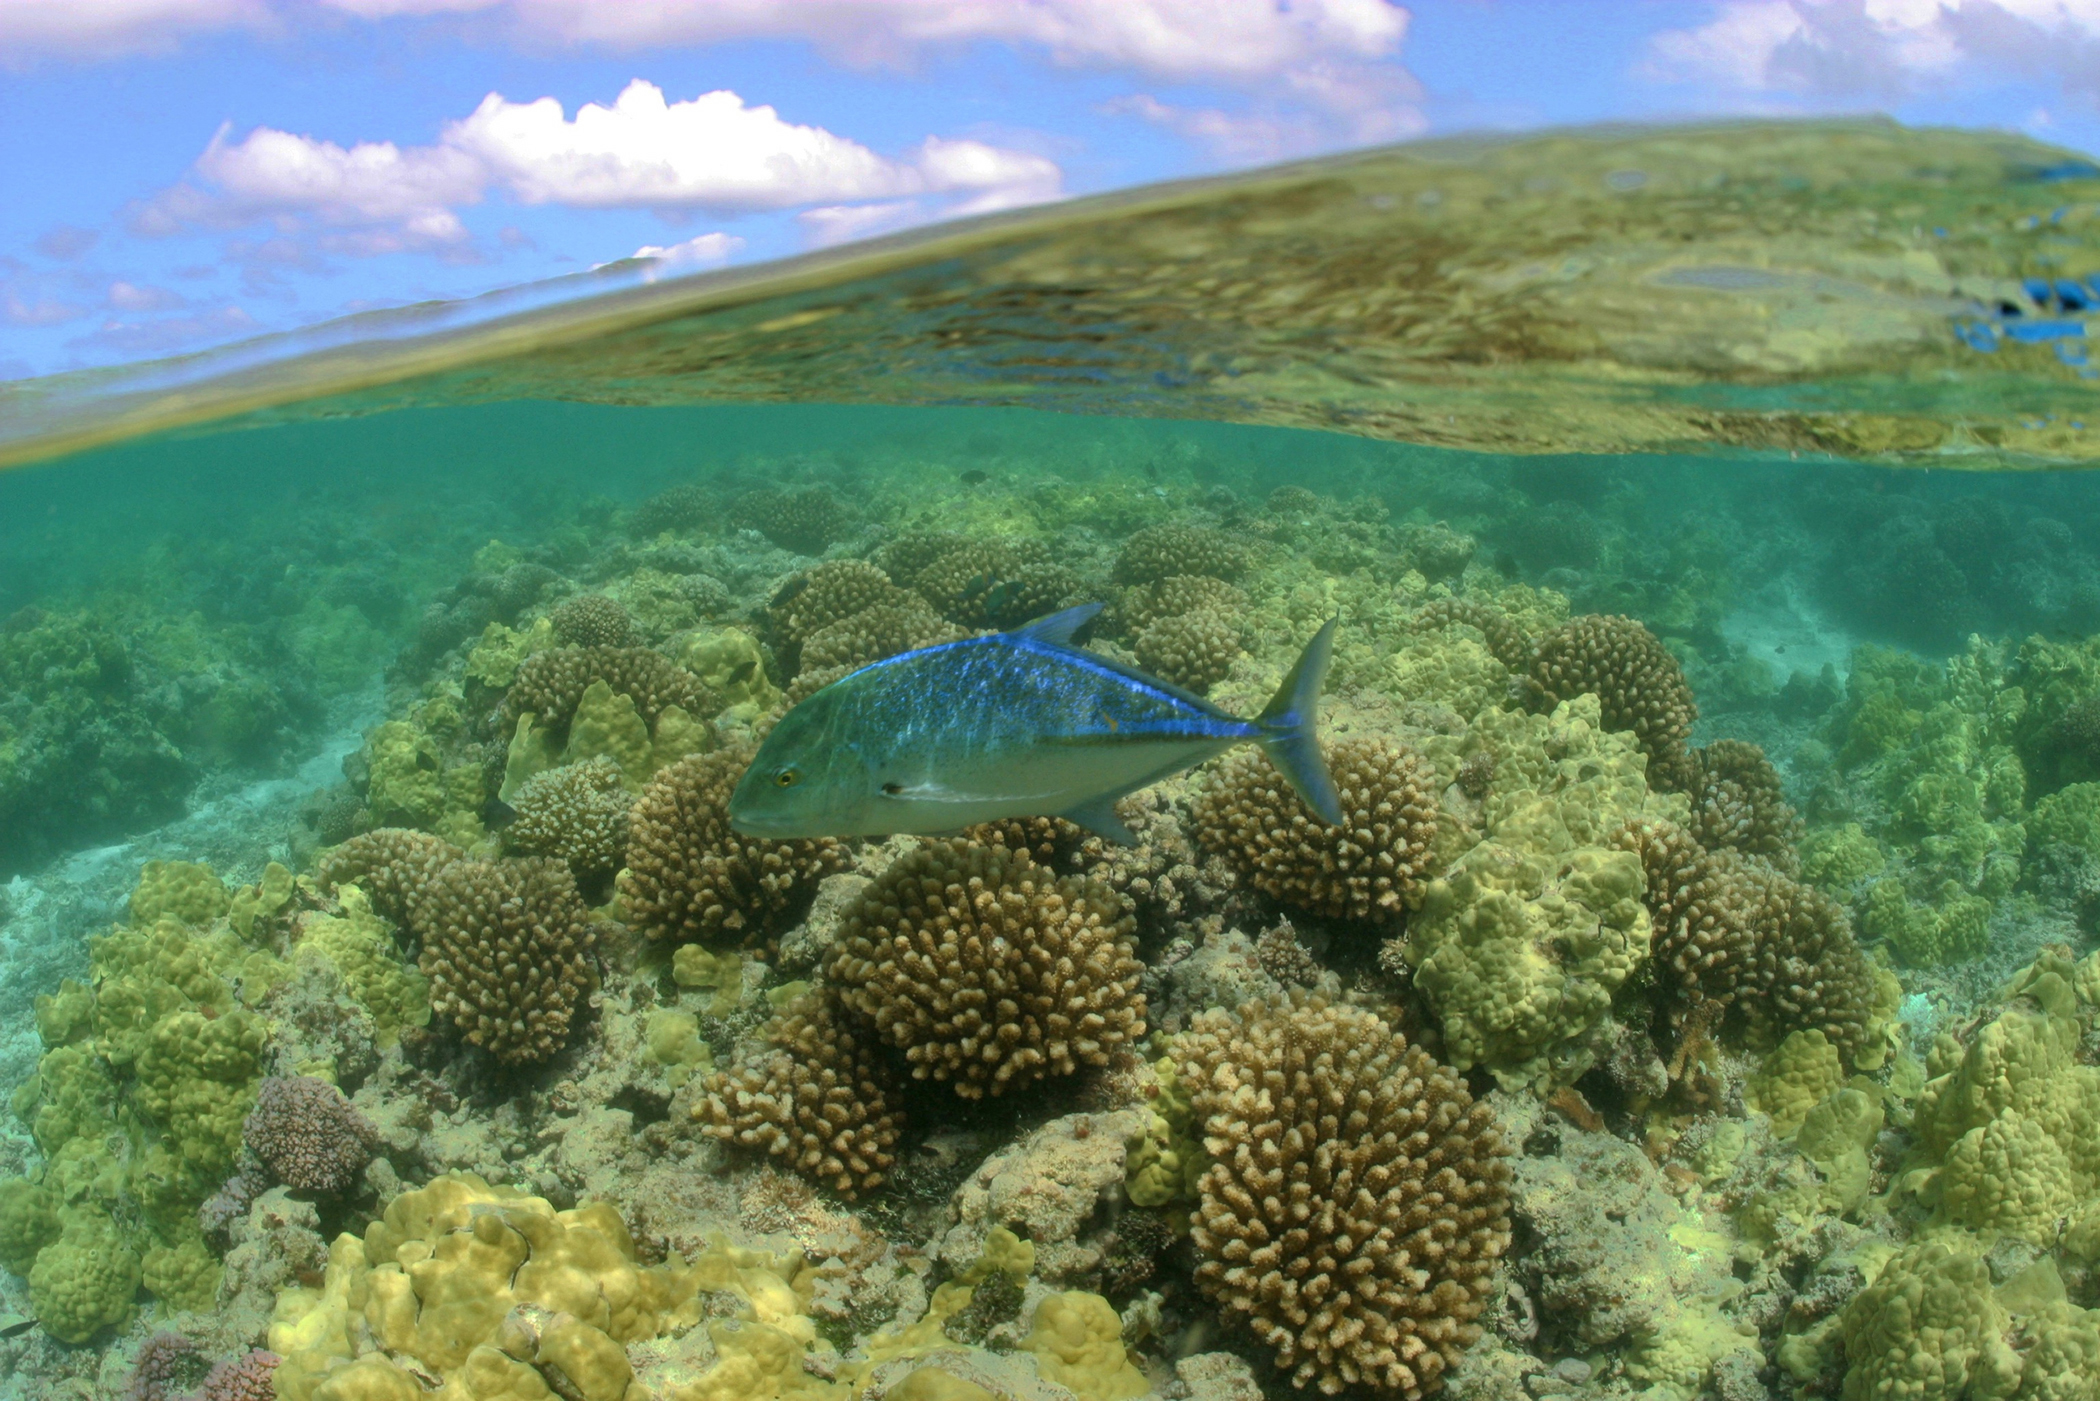 President Obama quadrupled the size of the Papahānaumokuākea Marine National Monument off the coast of Hawaii, creating the world’s largest marine protected area. When he declared National Oceans Month in June, he stated, “Oceans and their nearby regions are also highly vulnerable to the effects of a changing climate -- a once-distant threat that is now very present and is affecting ecosystems and shoreline communities on every coast. Rising sea levels, coastal storms, and a growing risk of erosion and flooding are looming realities faced by seaside towns.”(photo by James Watt).